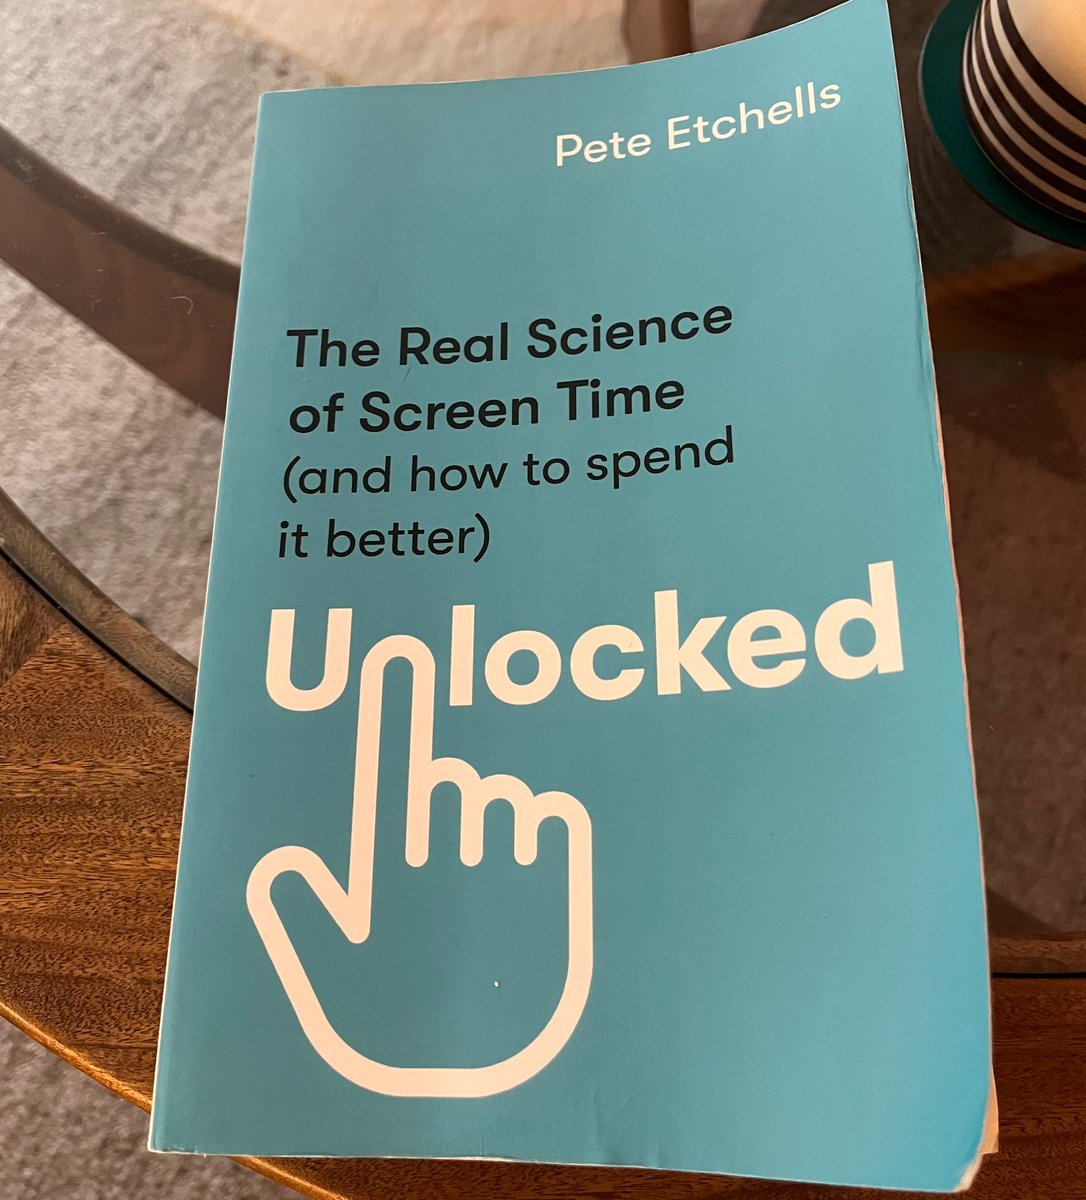 I’ve now finished this book by @PeteEtchells, and would really recommend it to anyone who wants to understand the latest psychological research into the effects of screens, smartphones and social media